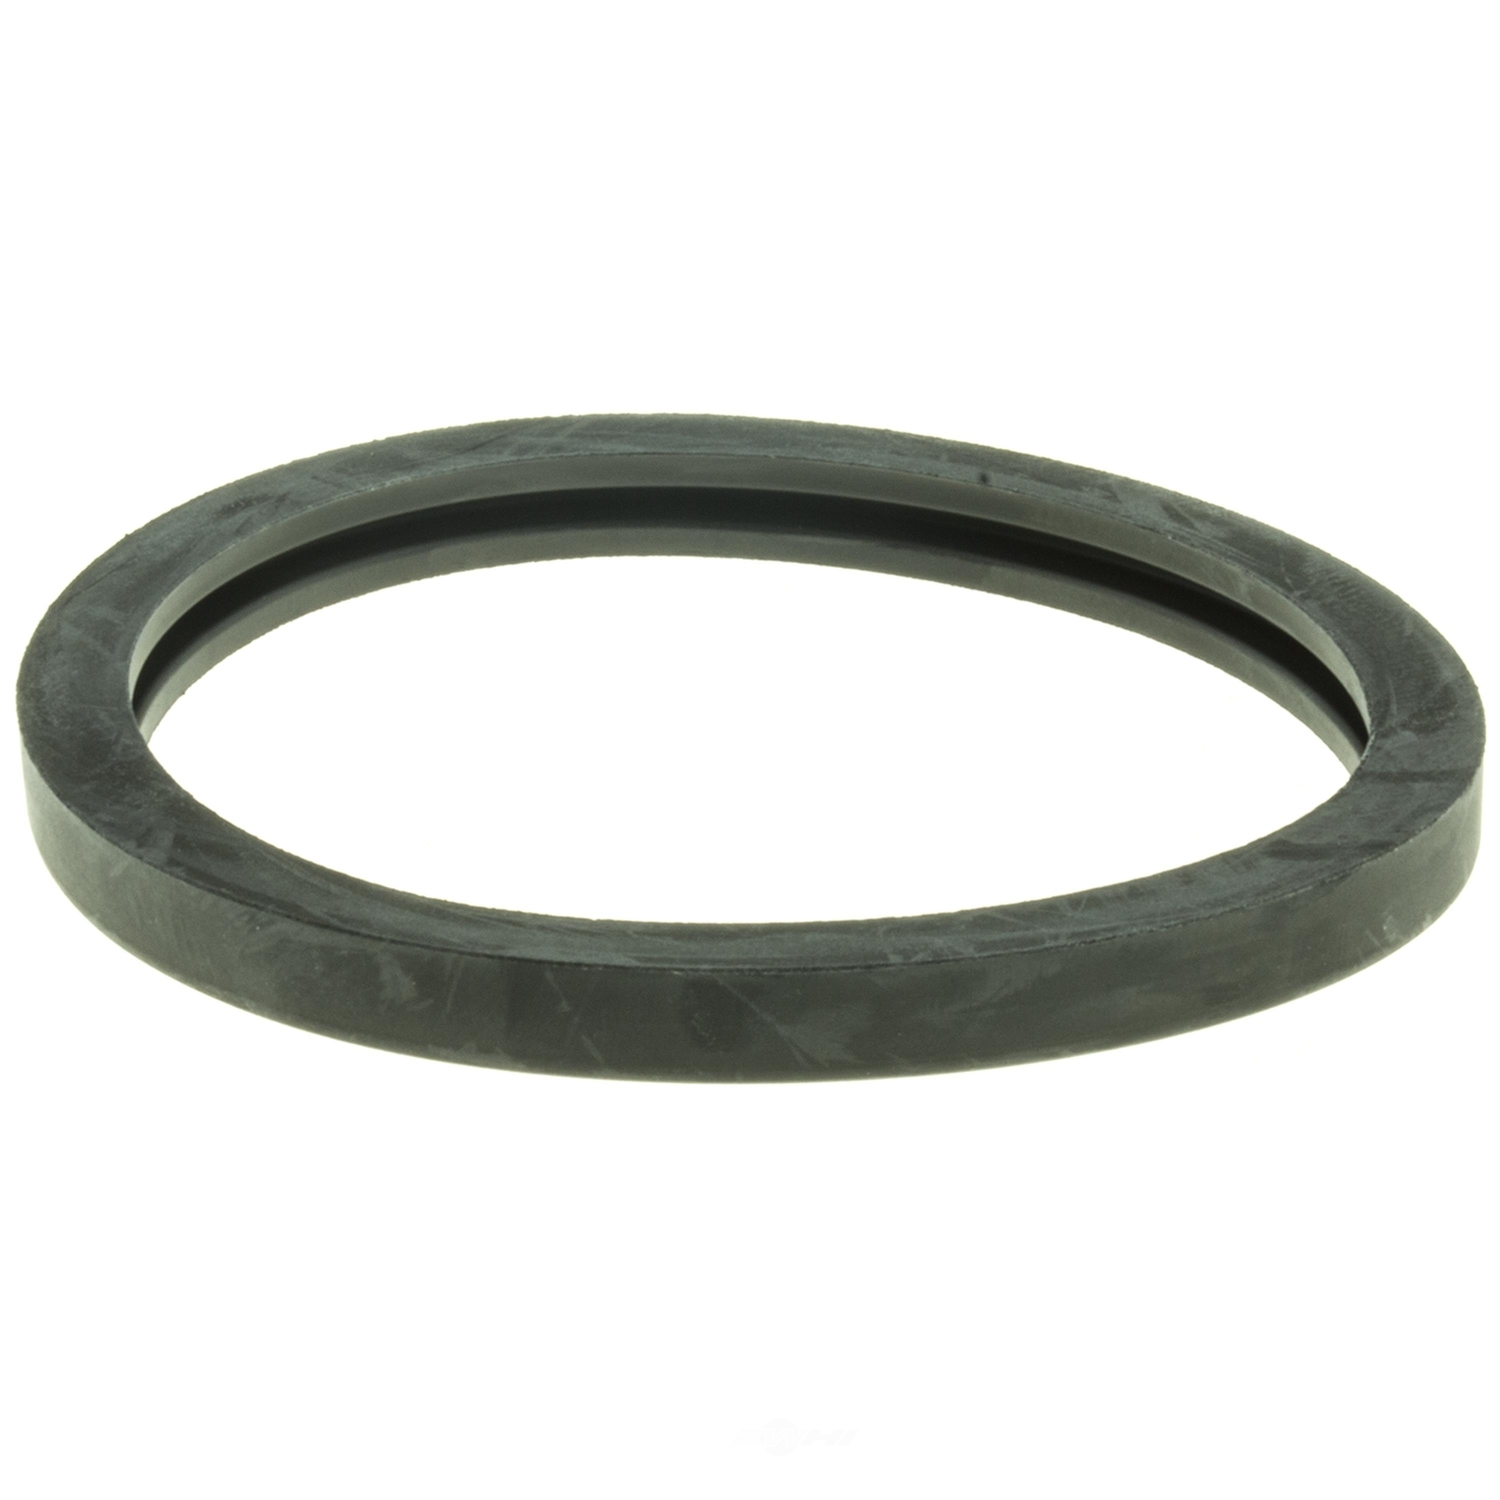 STANT - Thermostat Seal - STN 27285